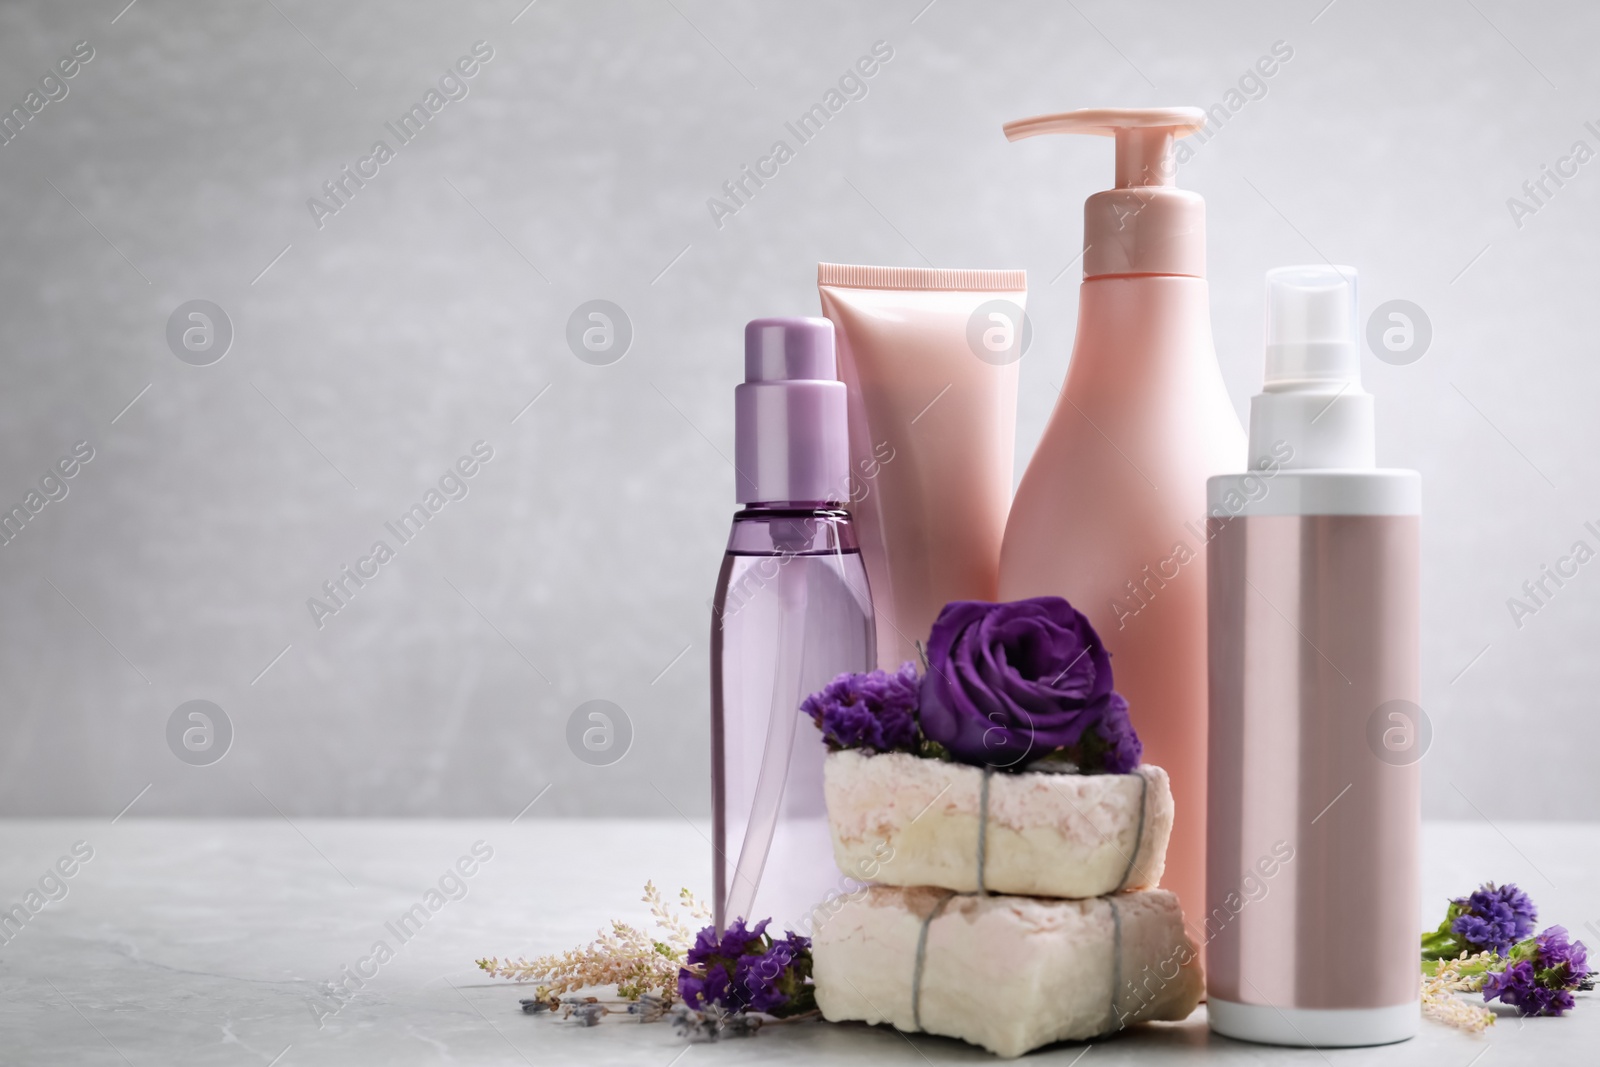 Photo of Set of hair cosmetic products and flowers on grey table. Space for text